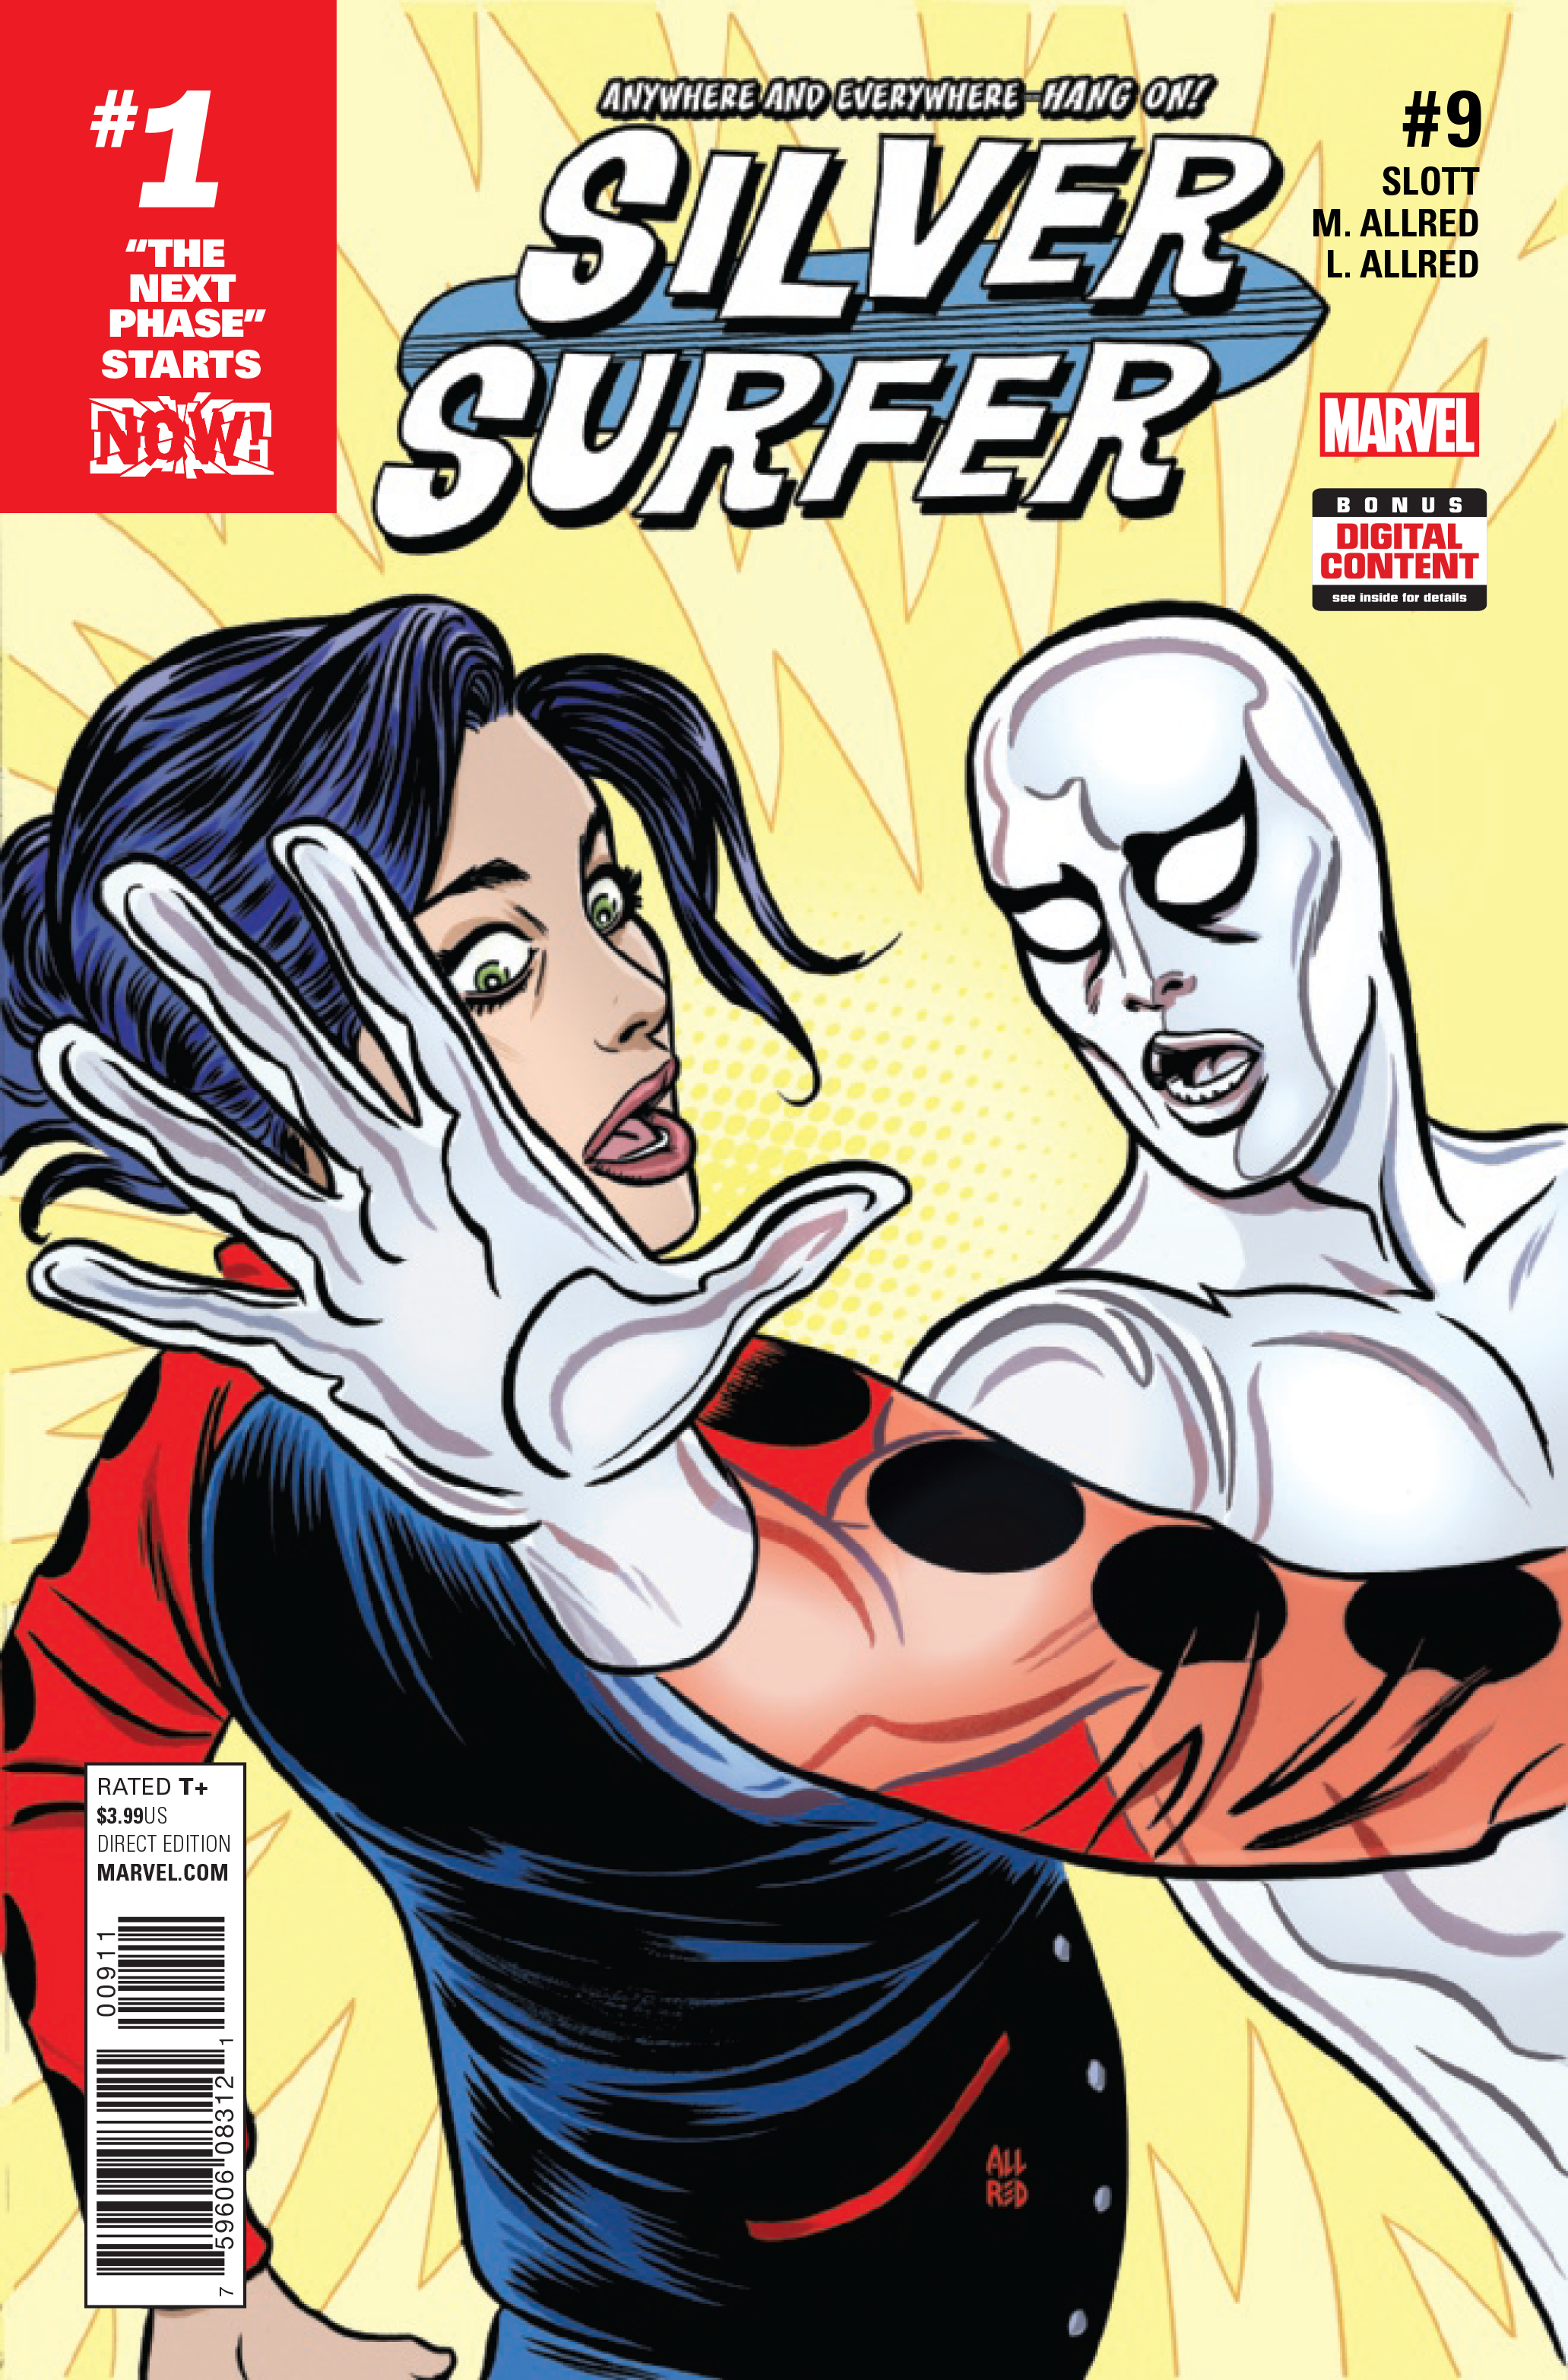 SILVER SURFER #9 NOW